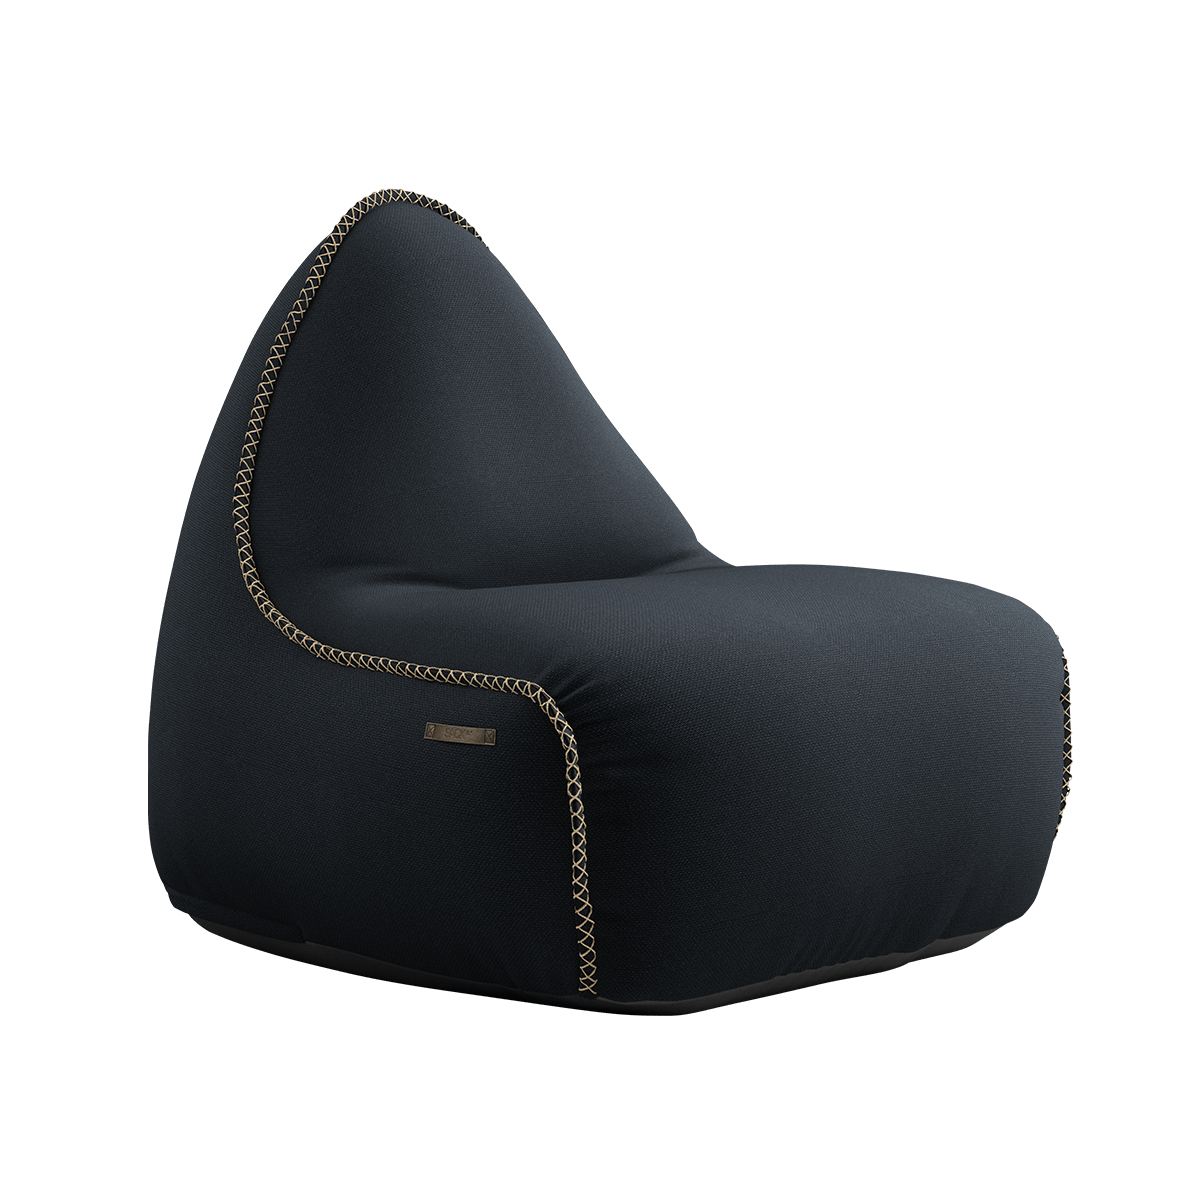 variant_8567103% | Cura Lounge Chair [Contract] - Cura Black | SACKit